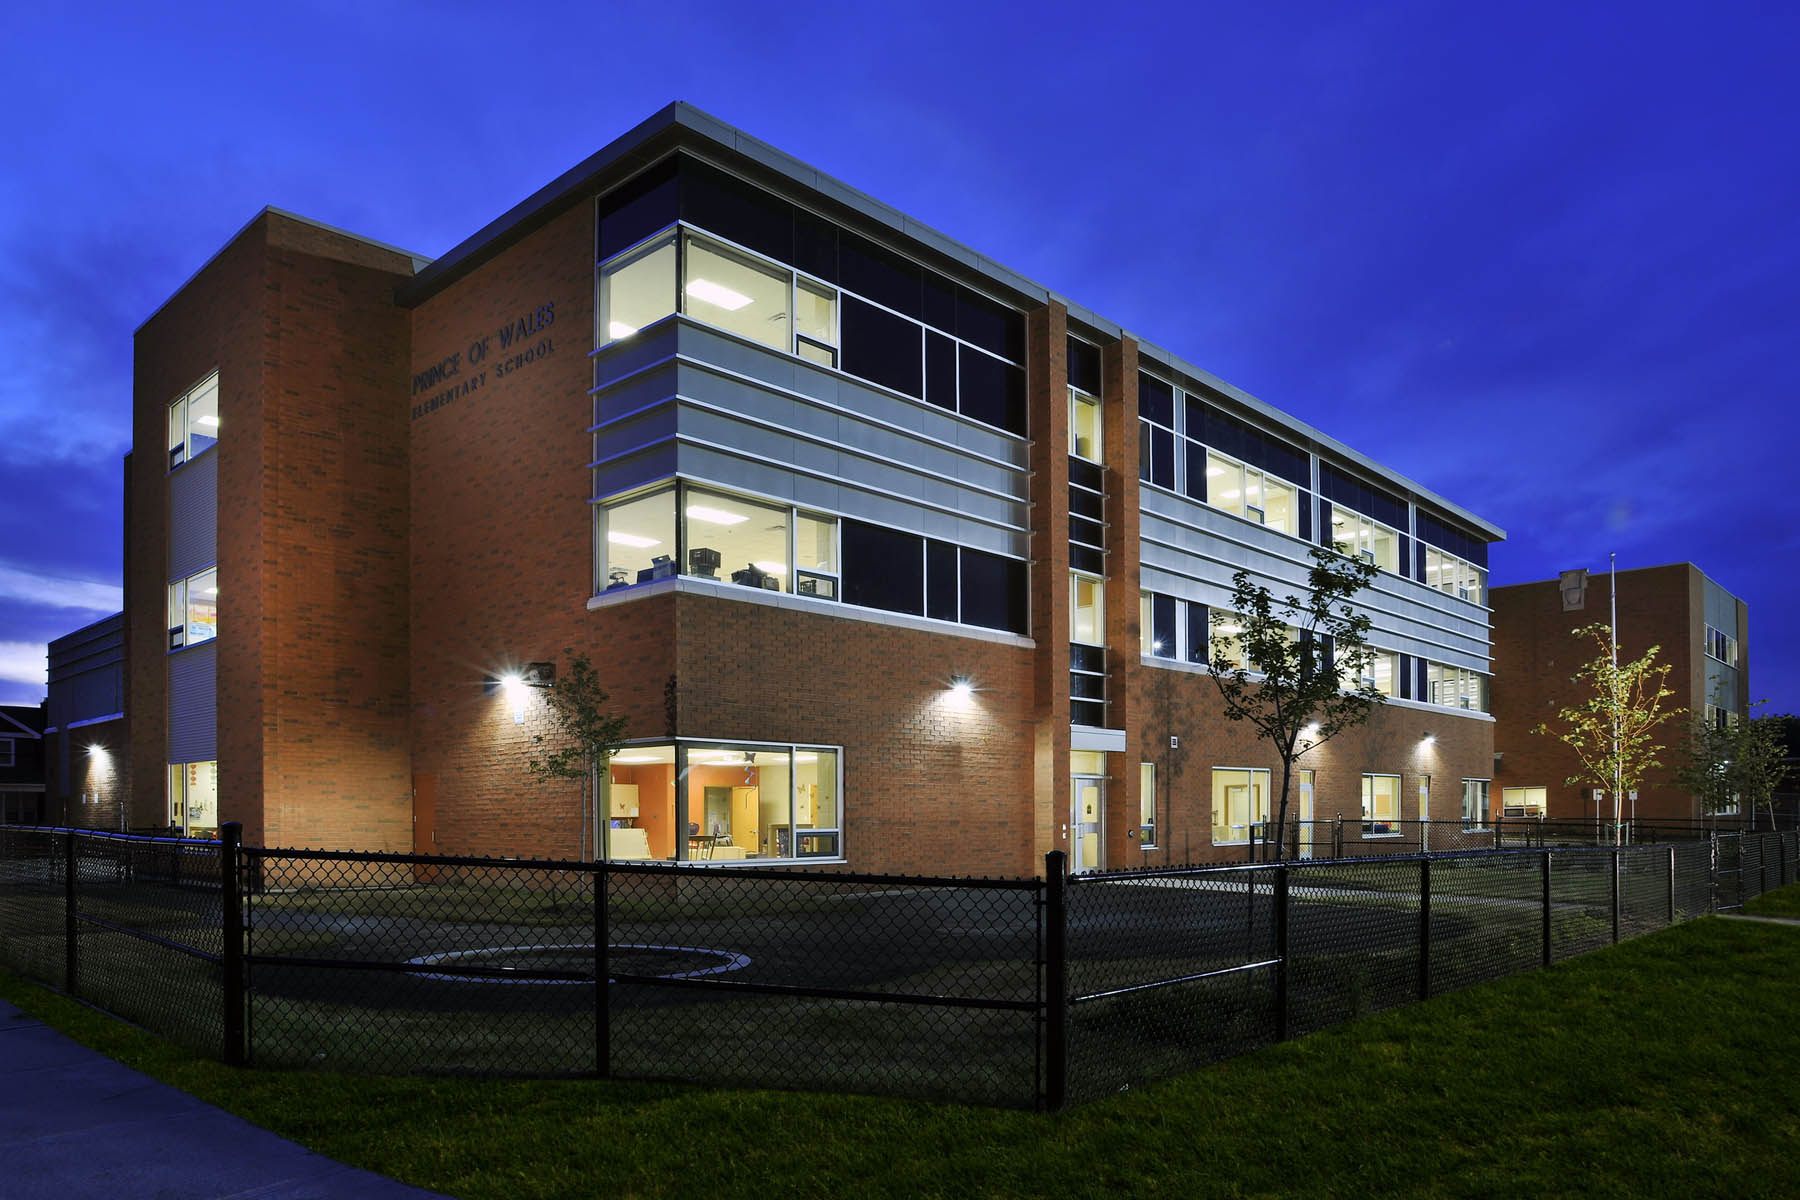 Illuminated three storey red brick school with sconce lighting, windows and steel detail at dawn